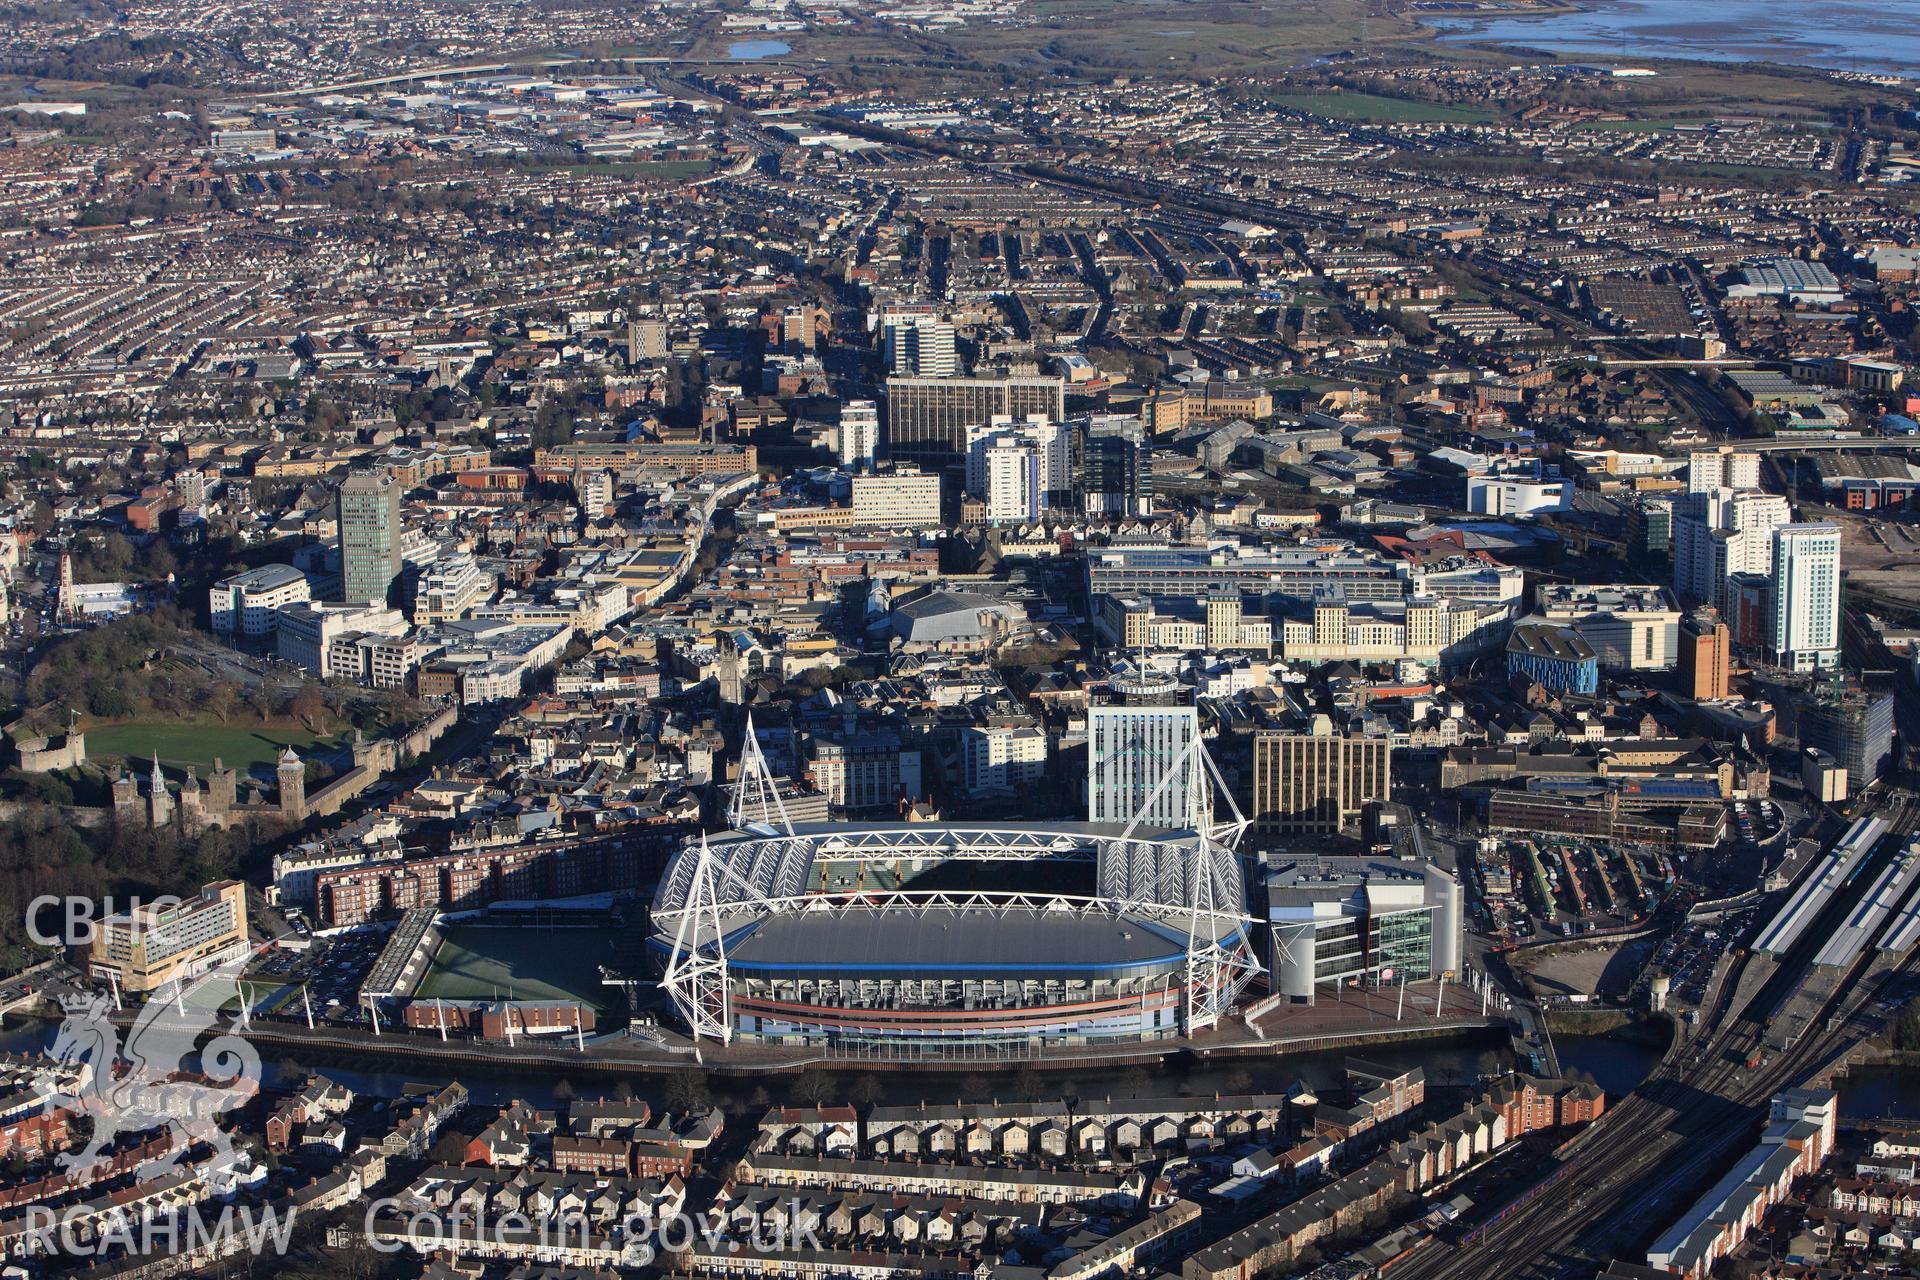 RCAHMW colour oblique photograph of Cardiff city centre, showing the Millennium Stadium. Taken by Toby Driver on 08/12/2010.